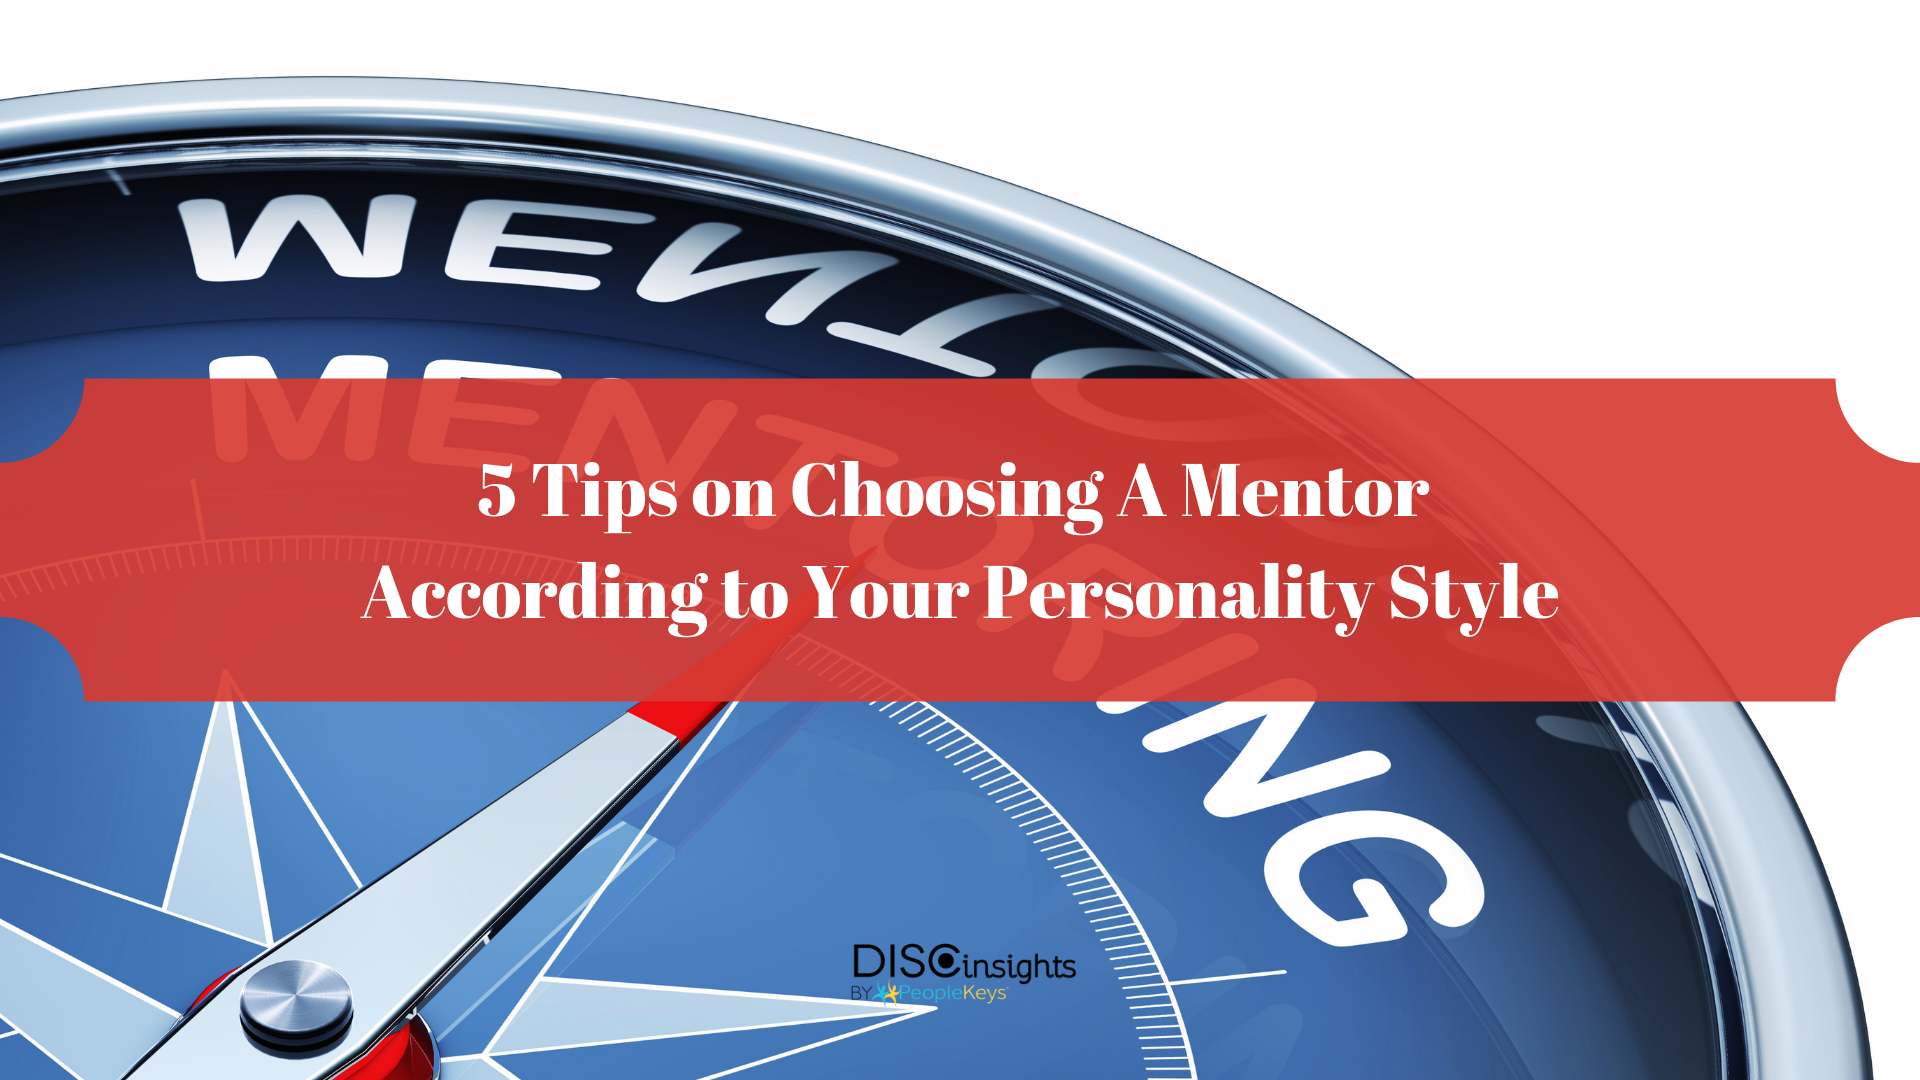 5 Tips on Choosing A Mentor According to Your Personality Style